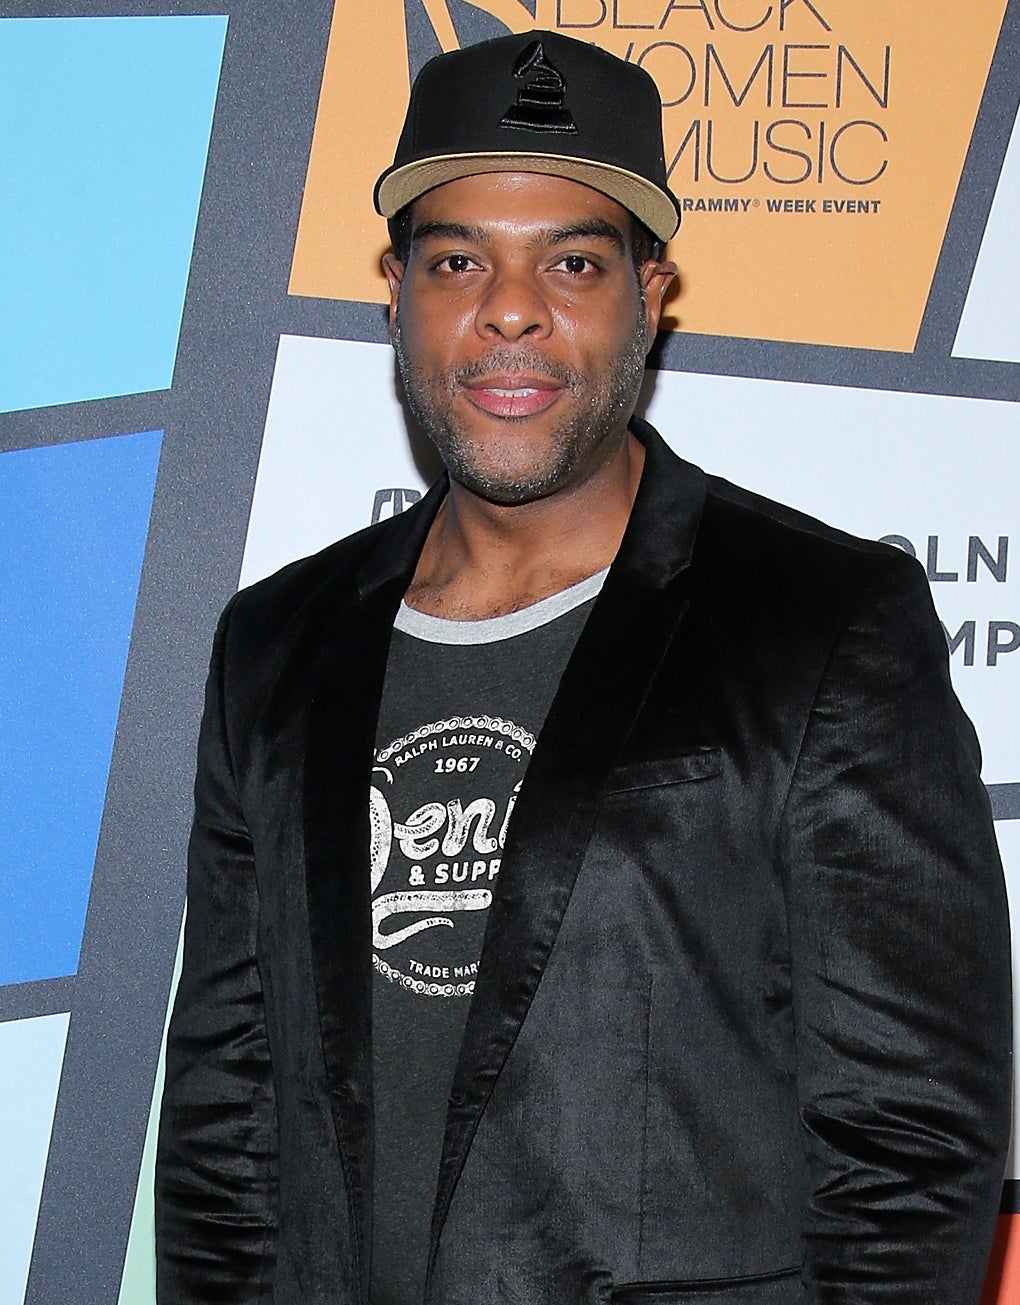 Troy Winbush posing for a photo at a media event wearing a cap, jacket, and graphic tee